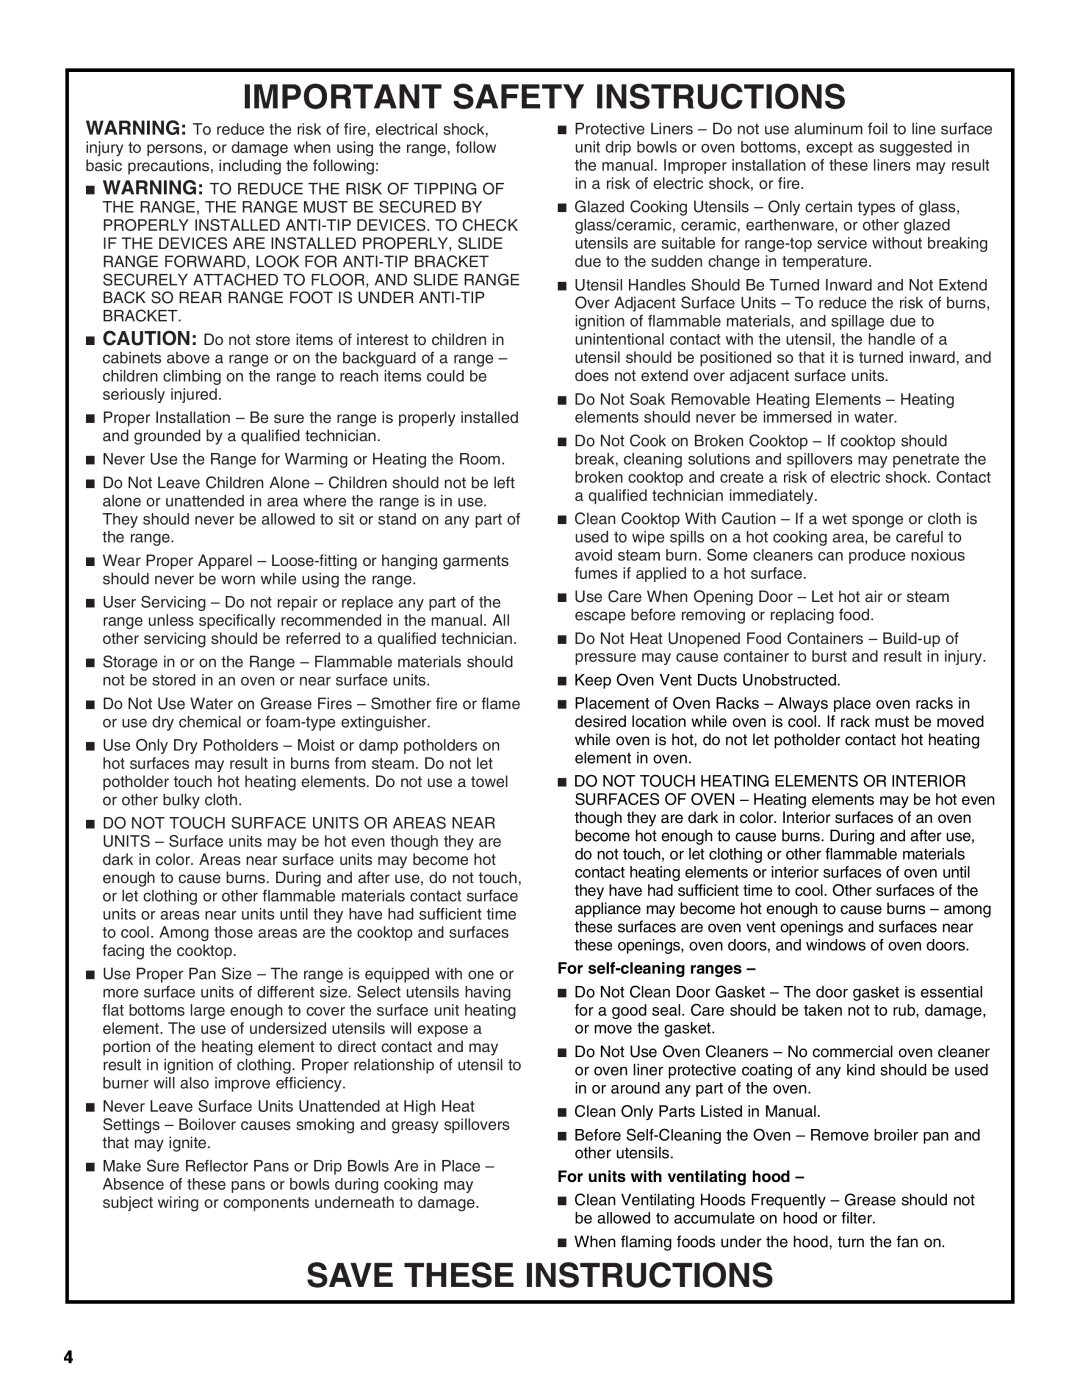 Whirlpool GERC4110PB2 manual Important Safety Instructions, Save These Instructions, For self-cleaningranges 